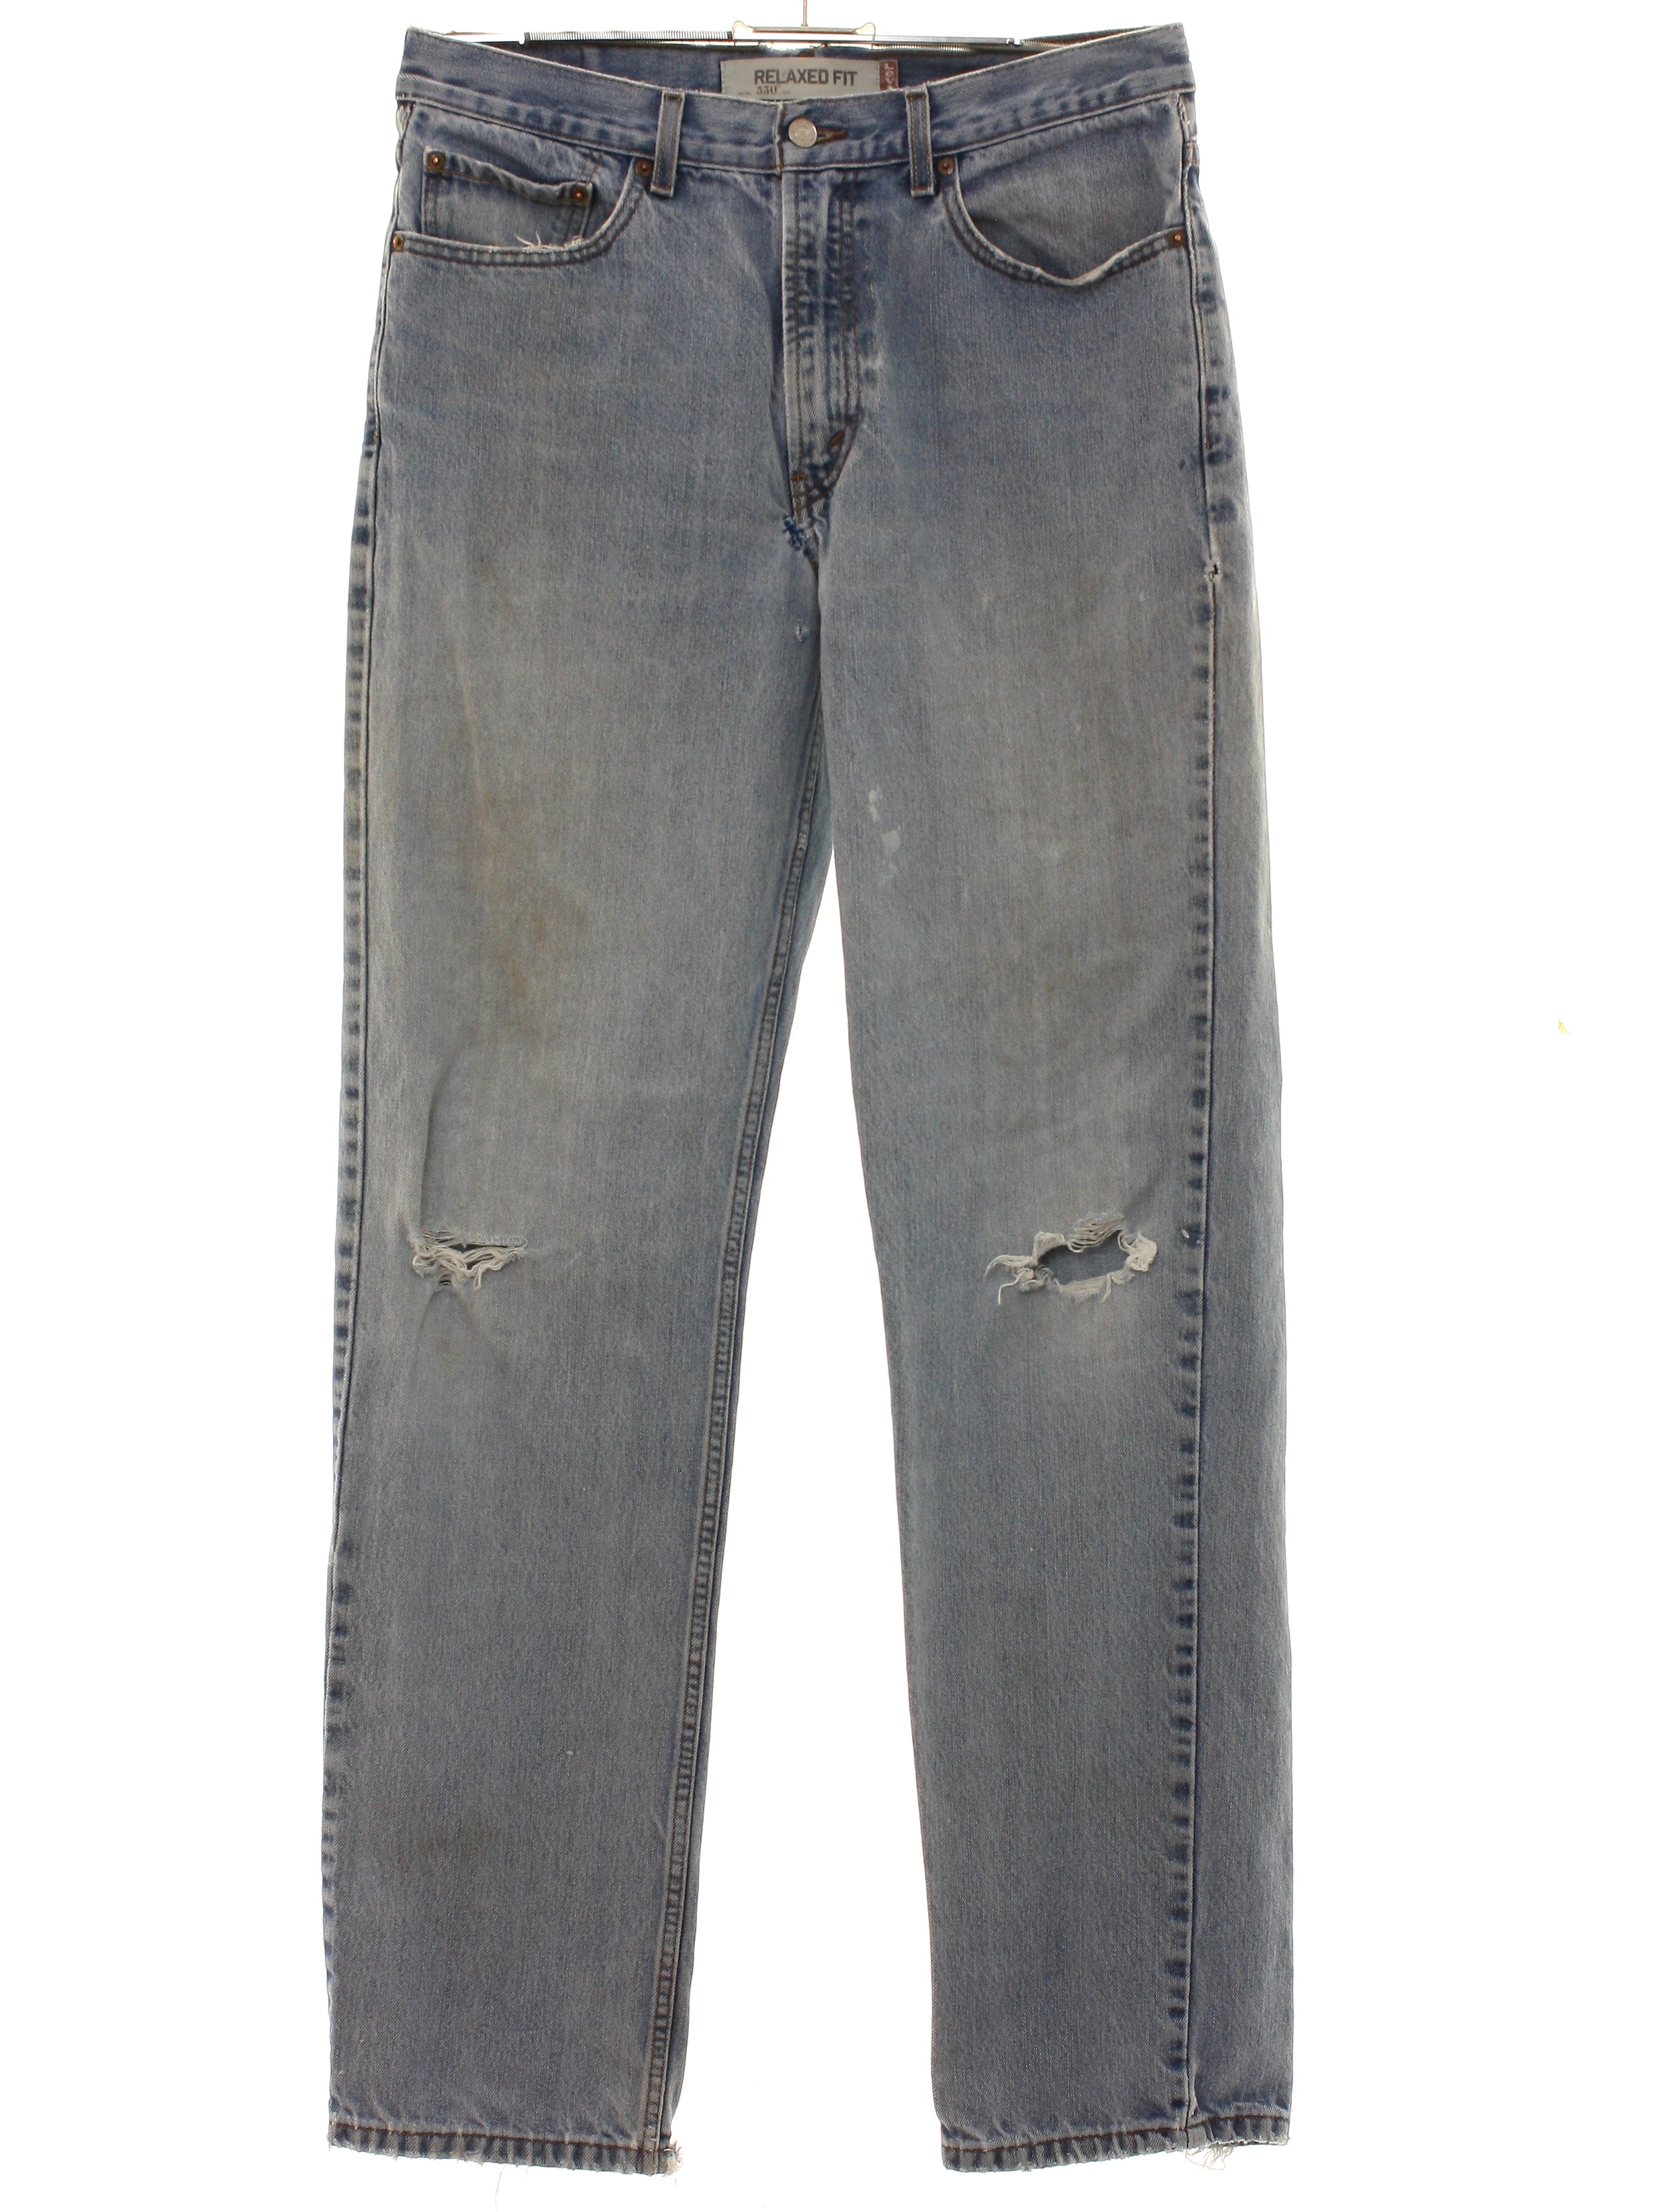 1990's Vintage Levis 550 Pants: Late 90s or Early y2k 2000s -Levis 550 ...